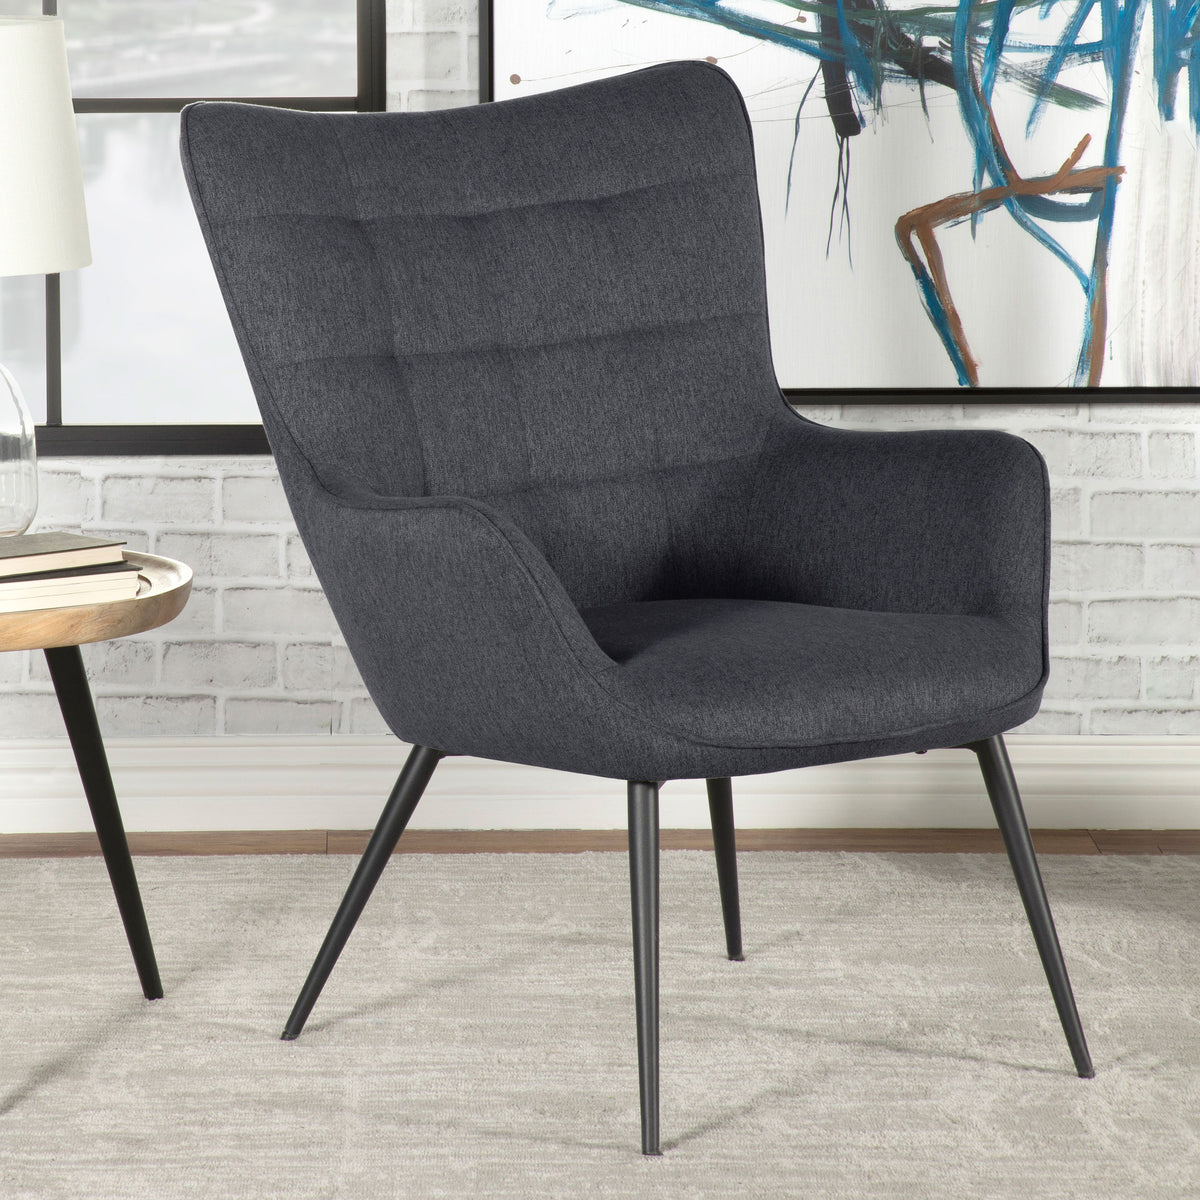 Isla Upholstered Flared Arms Accent Chair with Grid Tufted Isla Upholstered Flared Arms Accent Chair with Grid Tufted Half Price Furniture